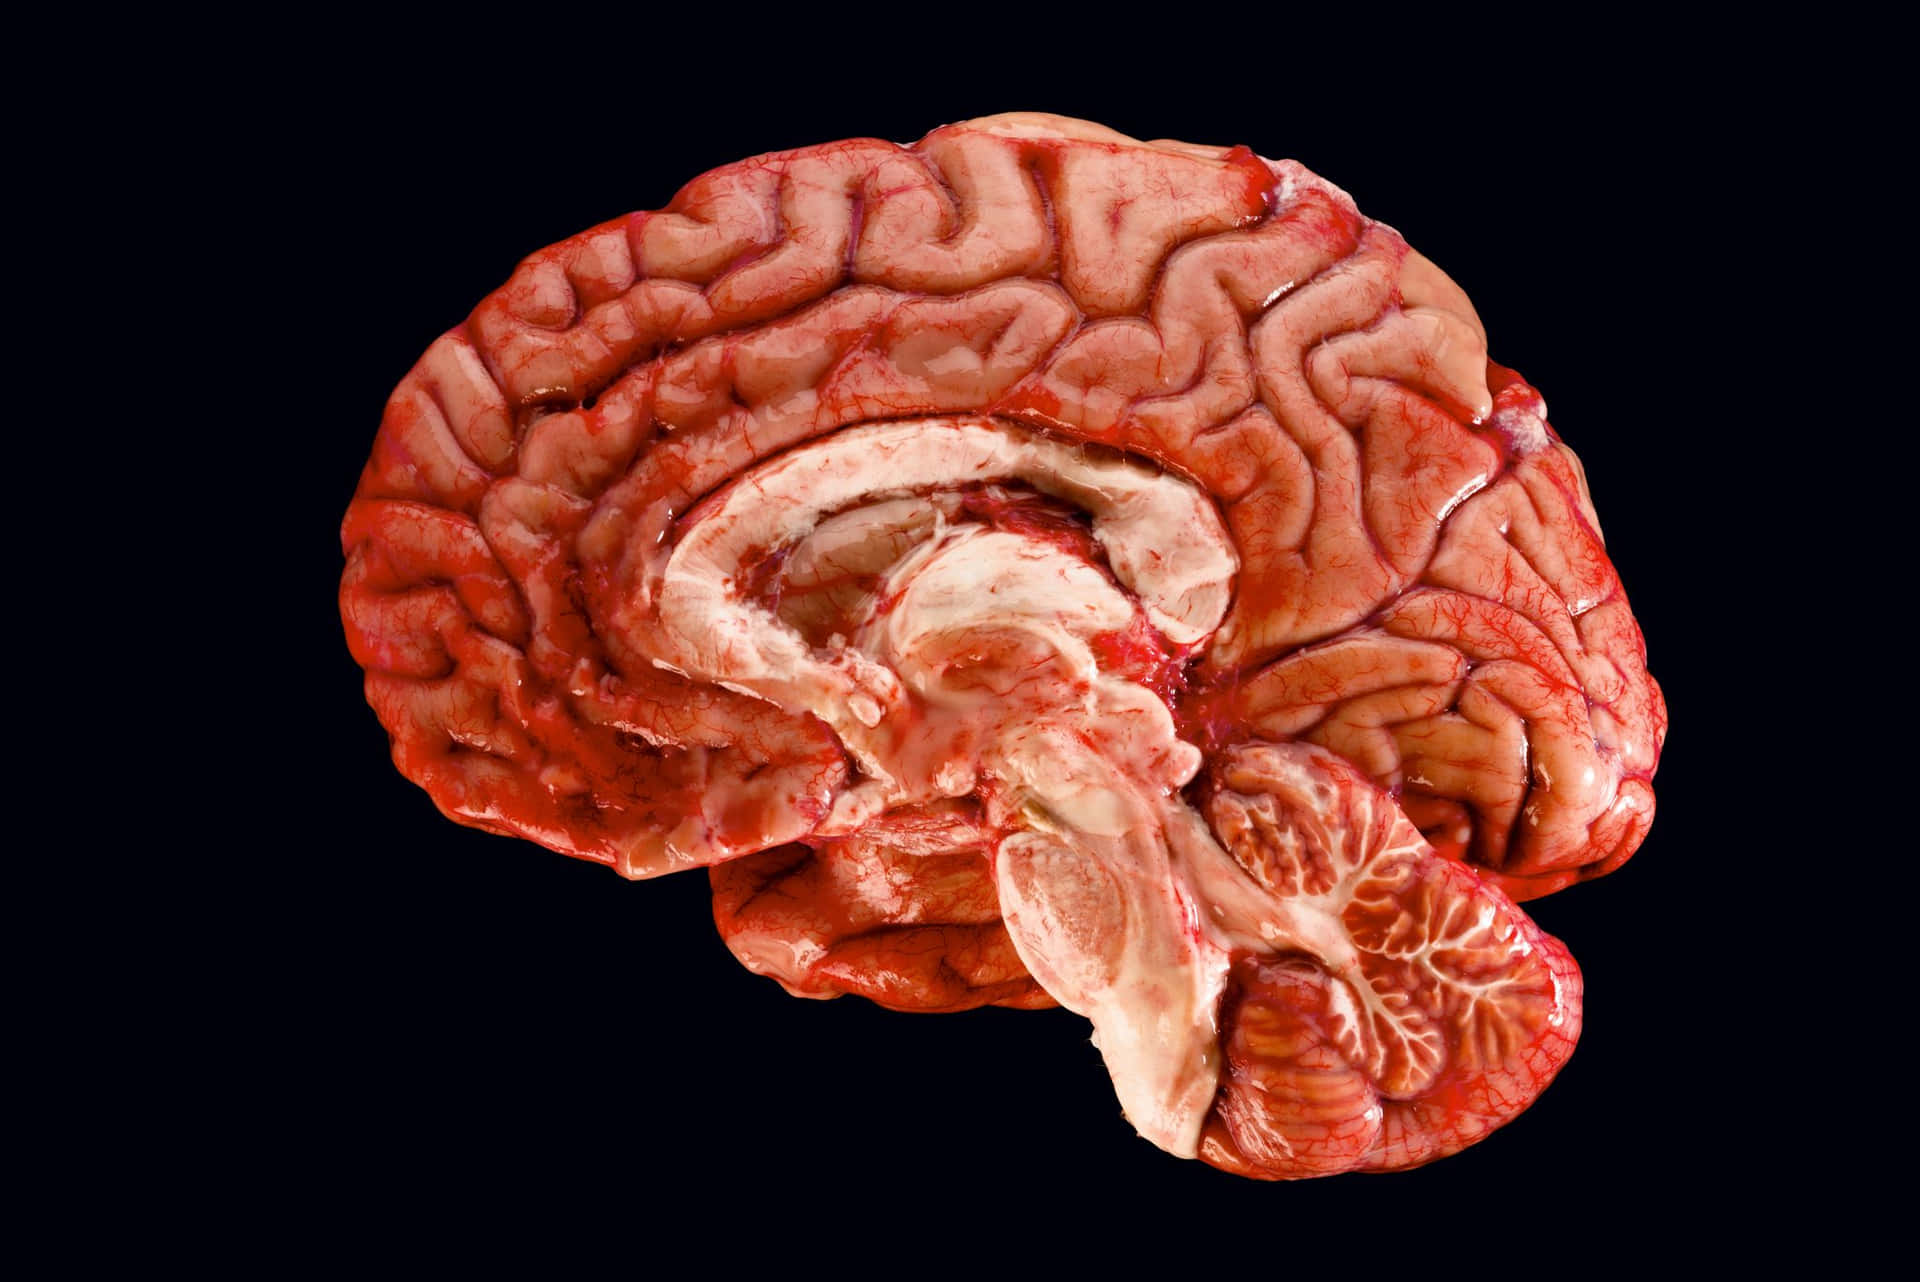 A Human Brain Is Shown On A Black Background Background